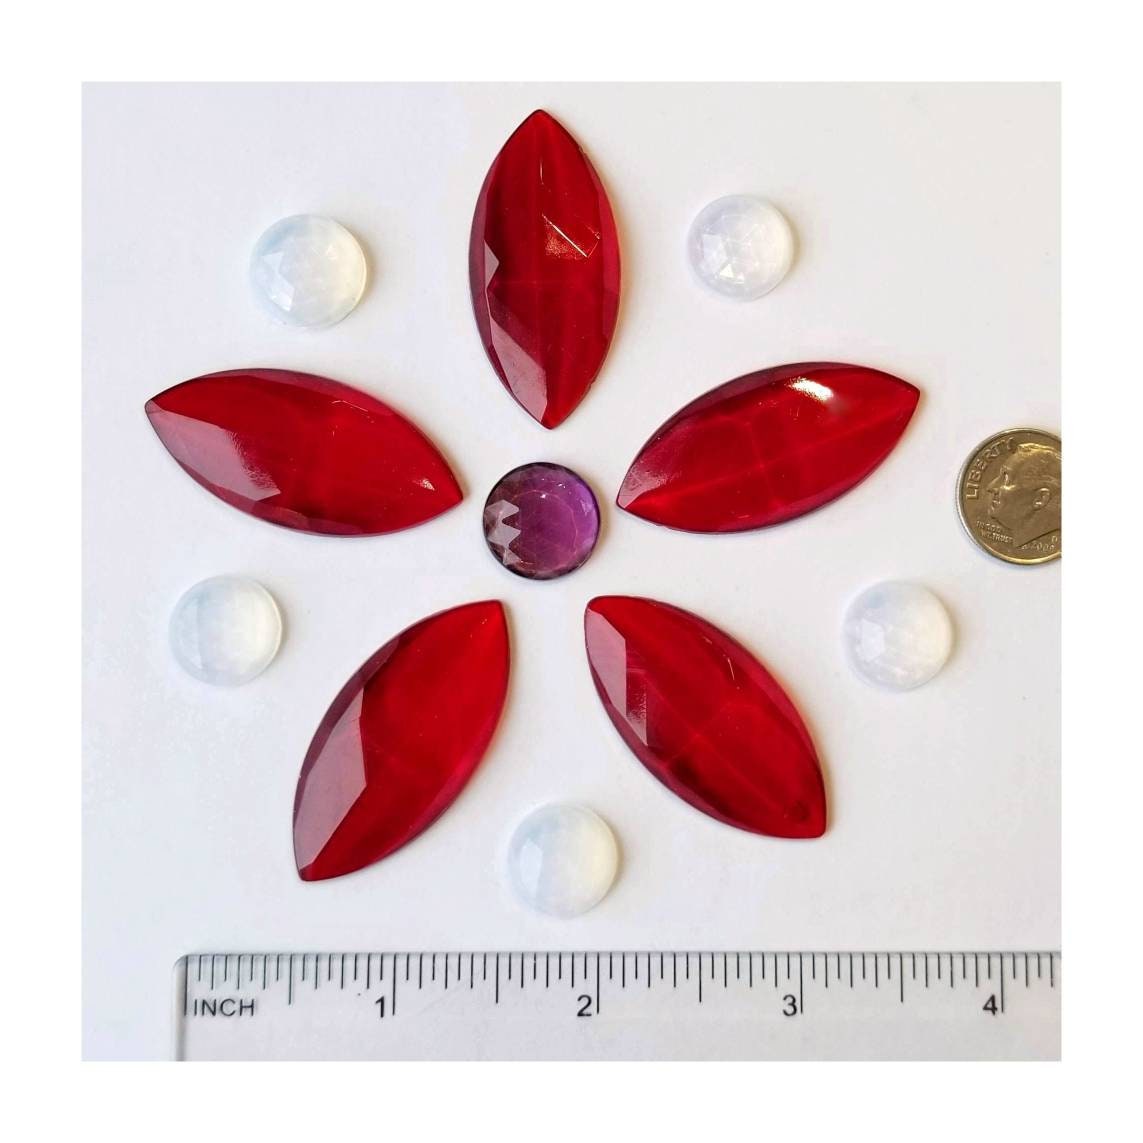 Red Jewels, Stained Glass, Vintage Faceted Gems for copper foil or lead came windows, 11 total in assorted sizes. Jewelry, crafts, pendant.